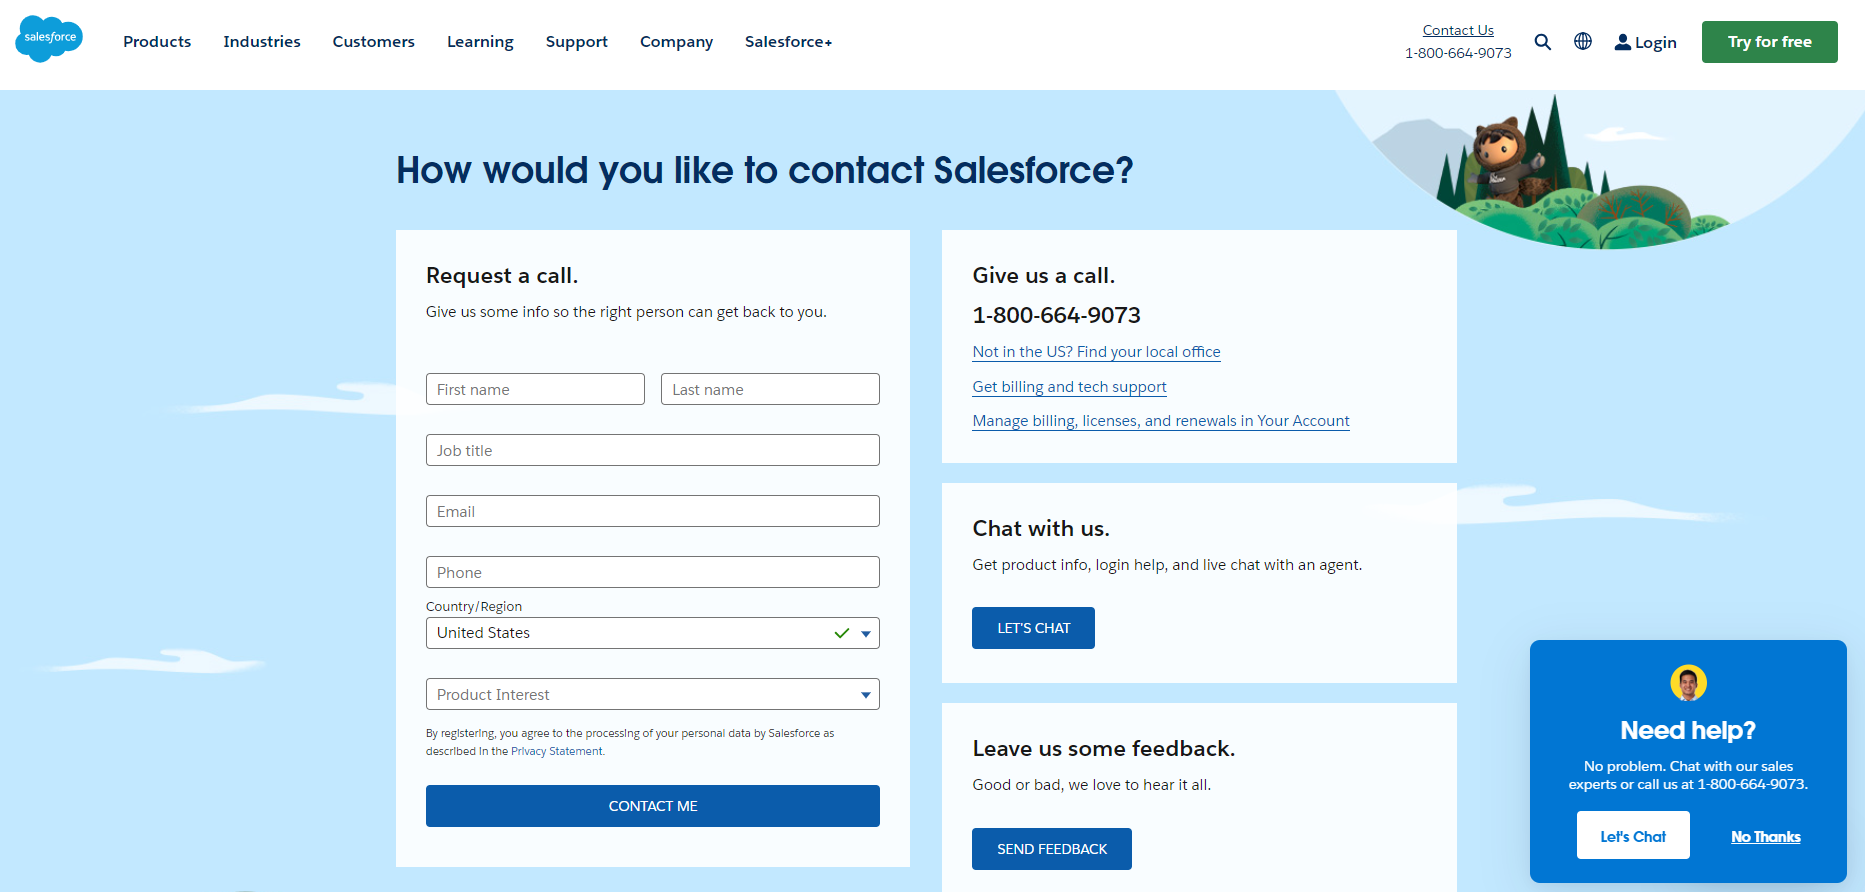 salesforce contact us 02.24 65cbe50c51b4a sej - Contact Us Page Examples: 44 Designs For Inspiration